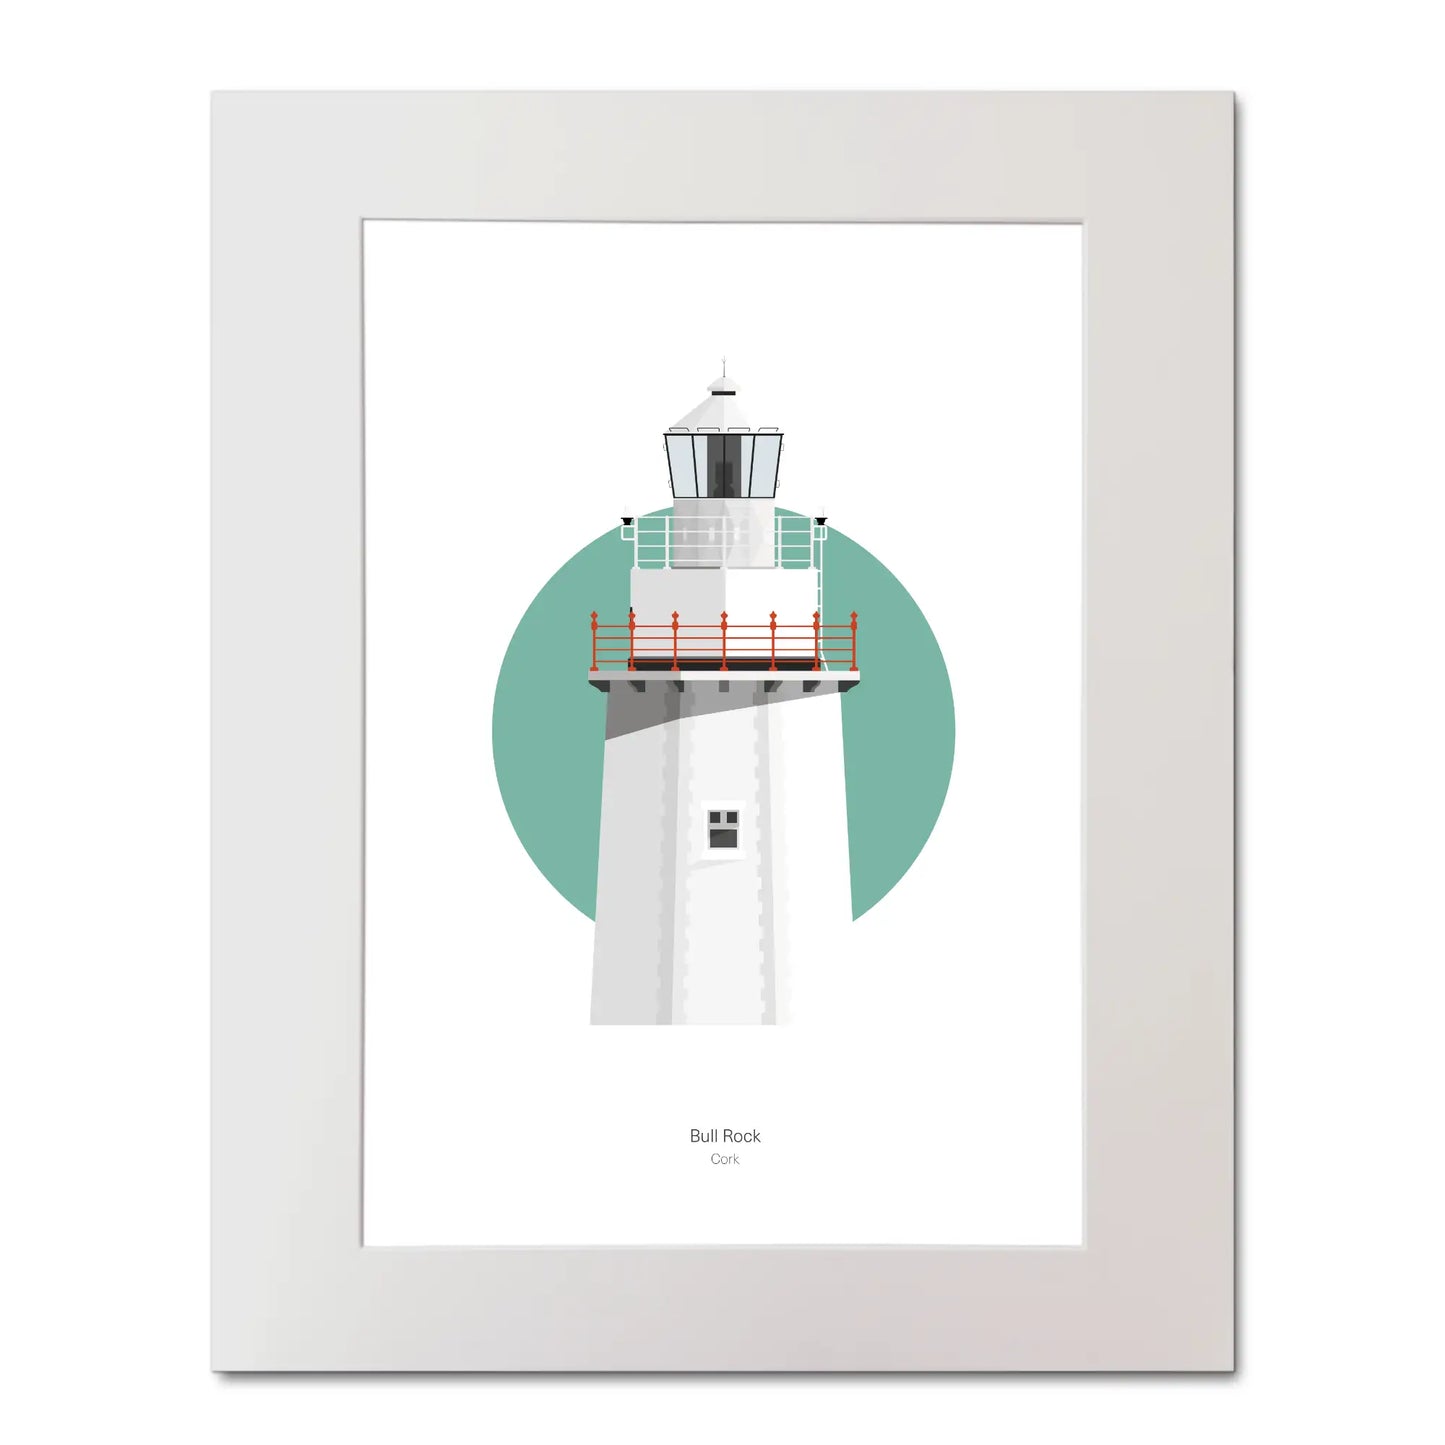 Illustration of Bull Rock lighthouse on a white background inside light blue square, mounted and measuring 40x50cm.